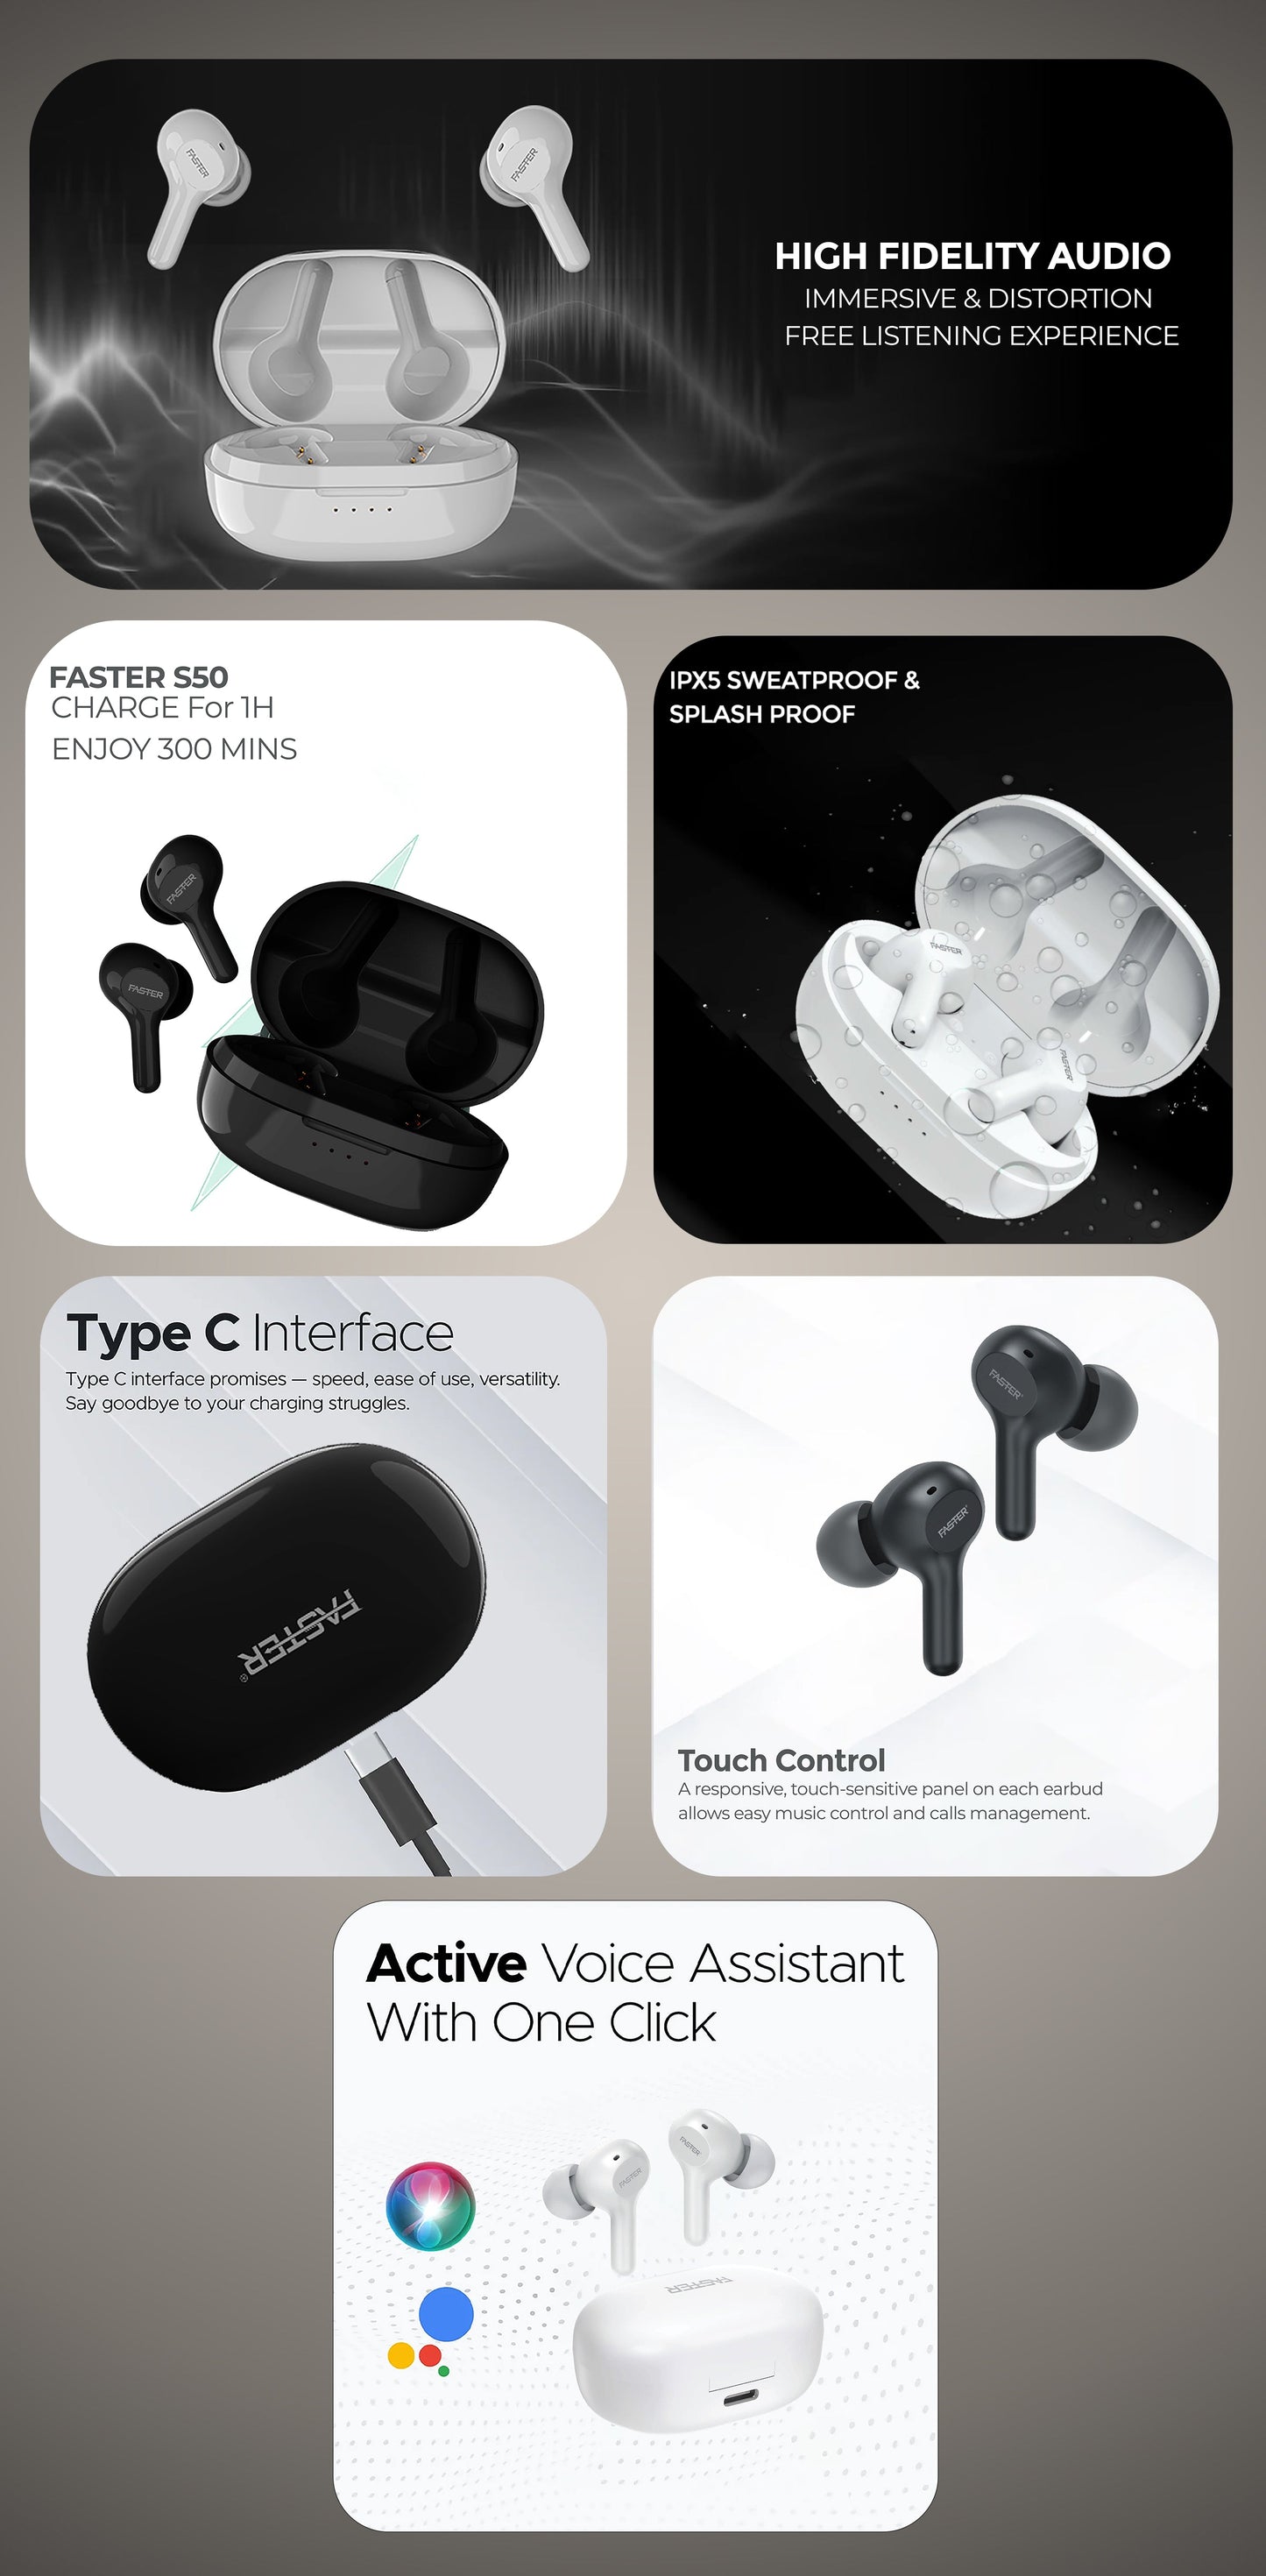 Unleash Your Music: FASTER S50 Wireless Stereo Earbuds